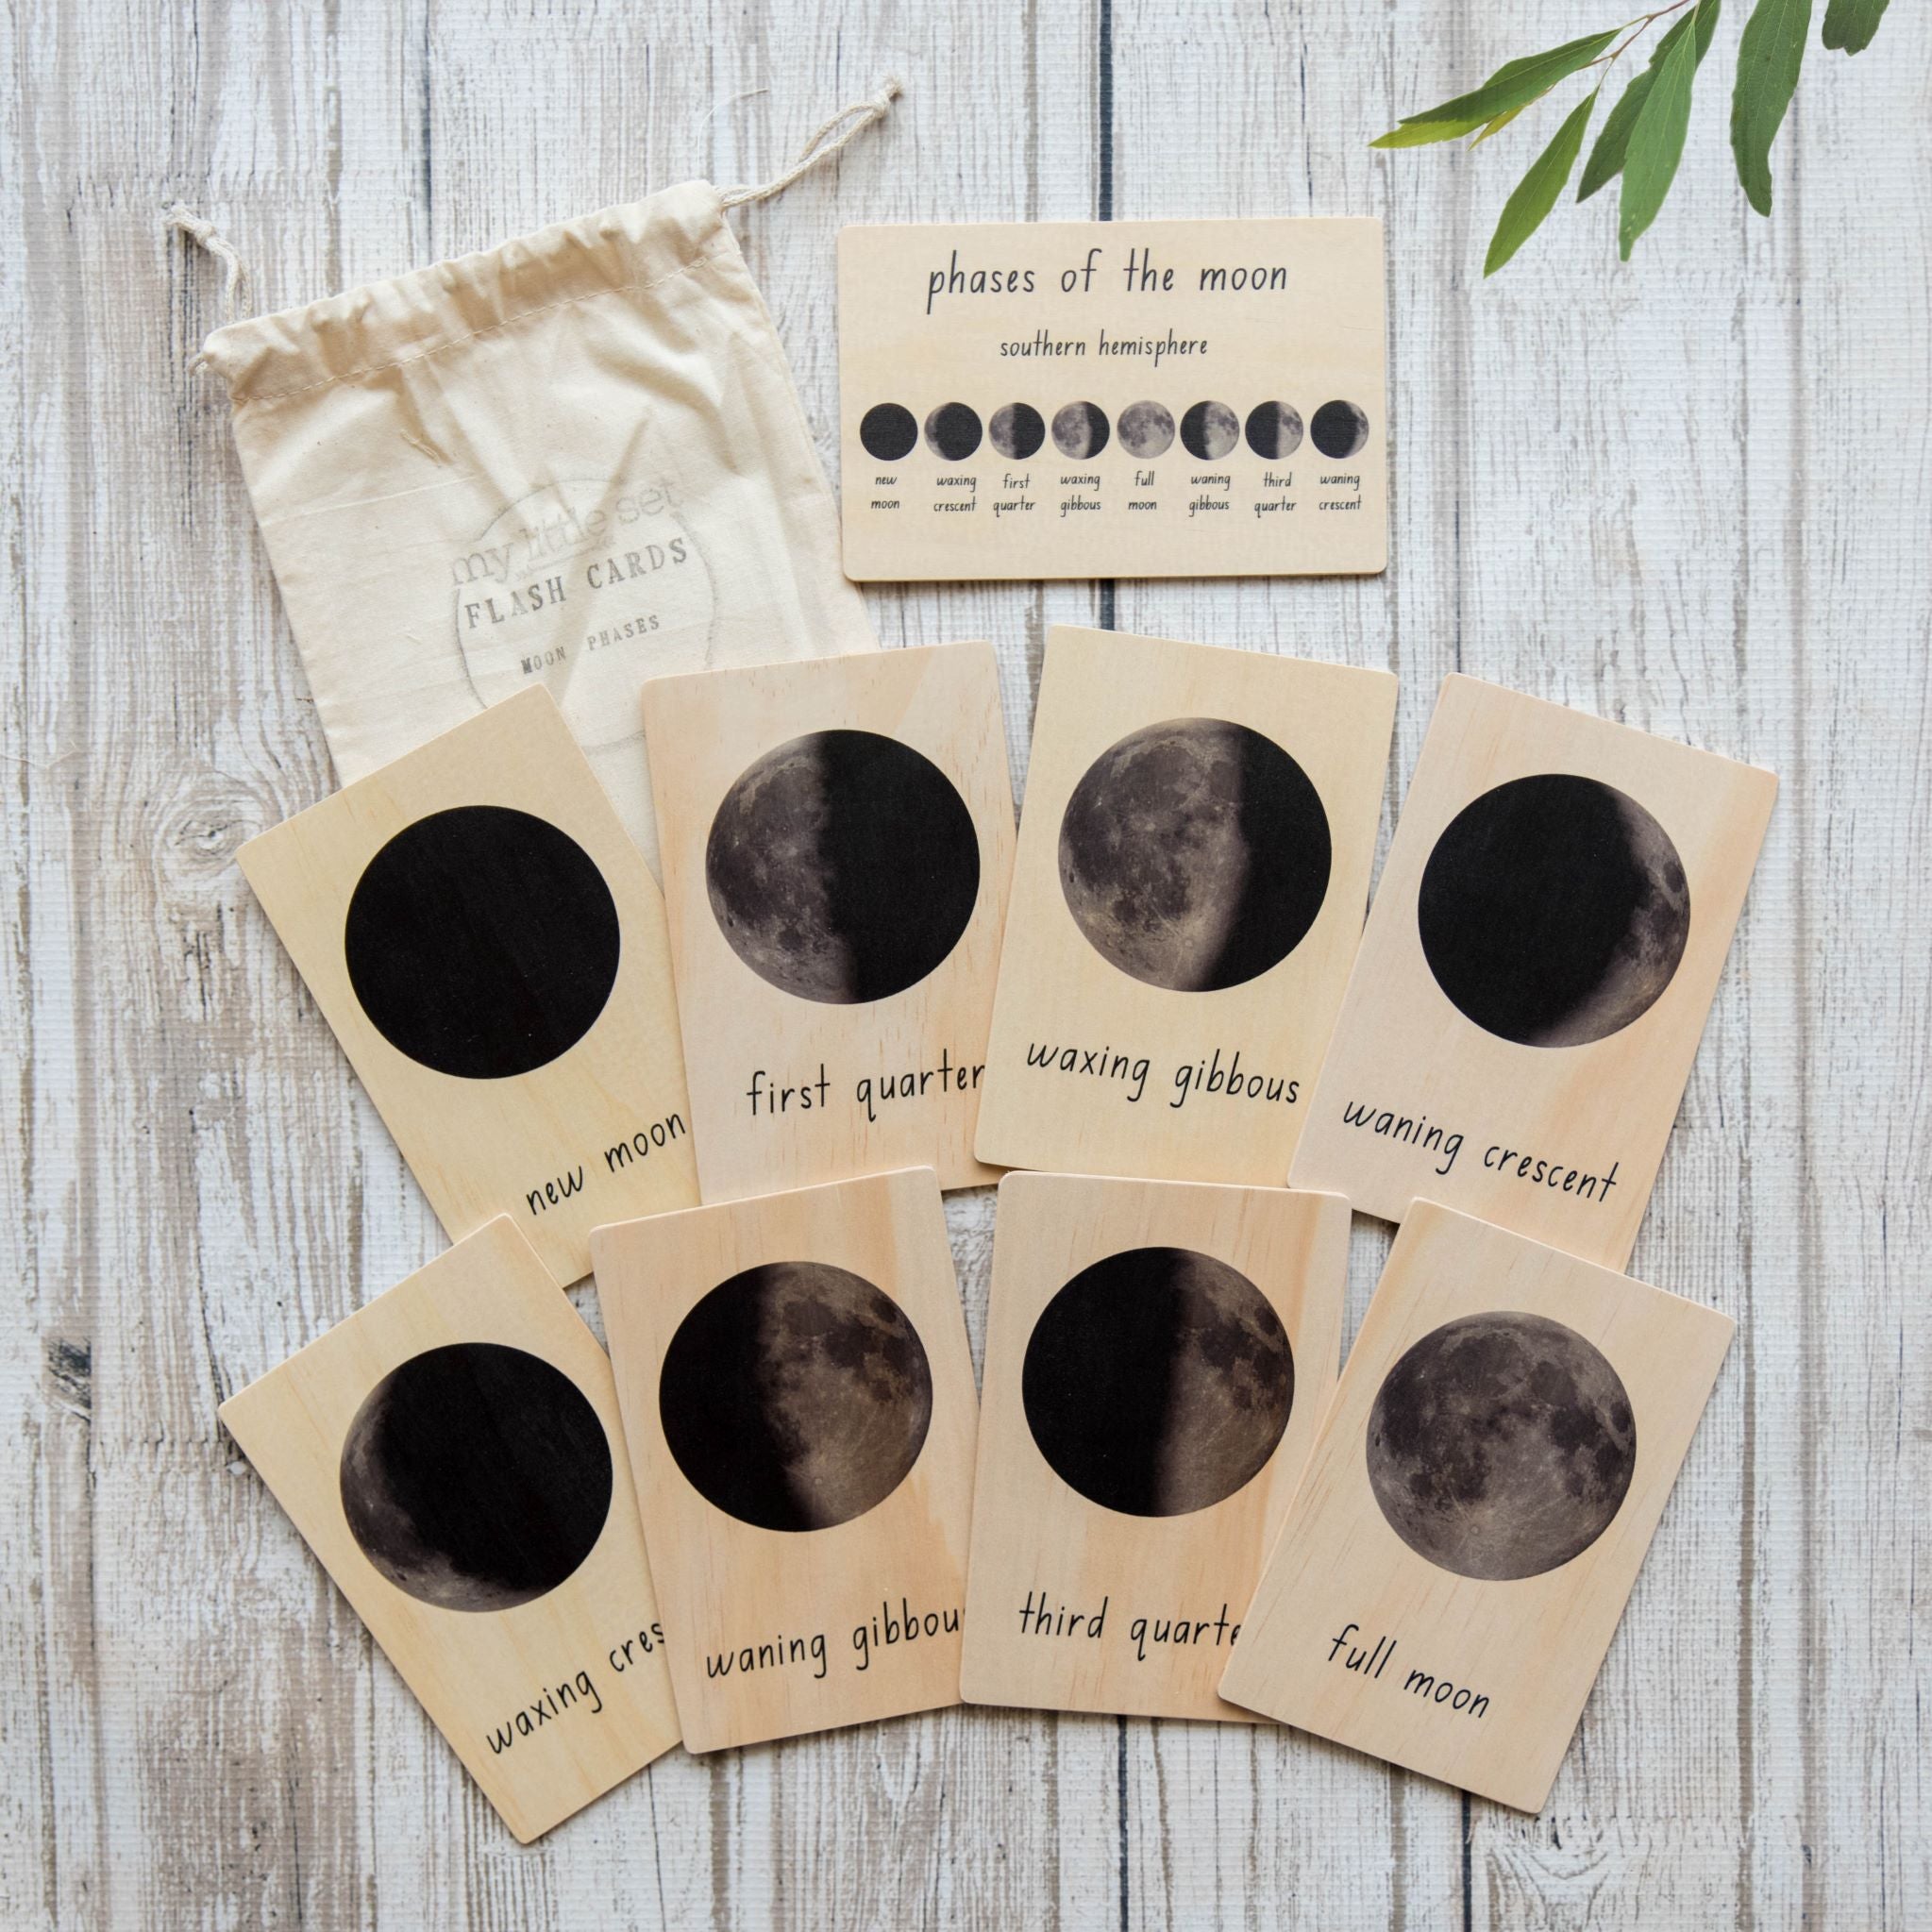 moon phases - flash cards